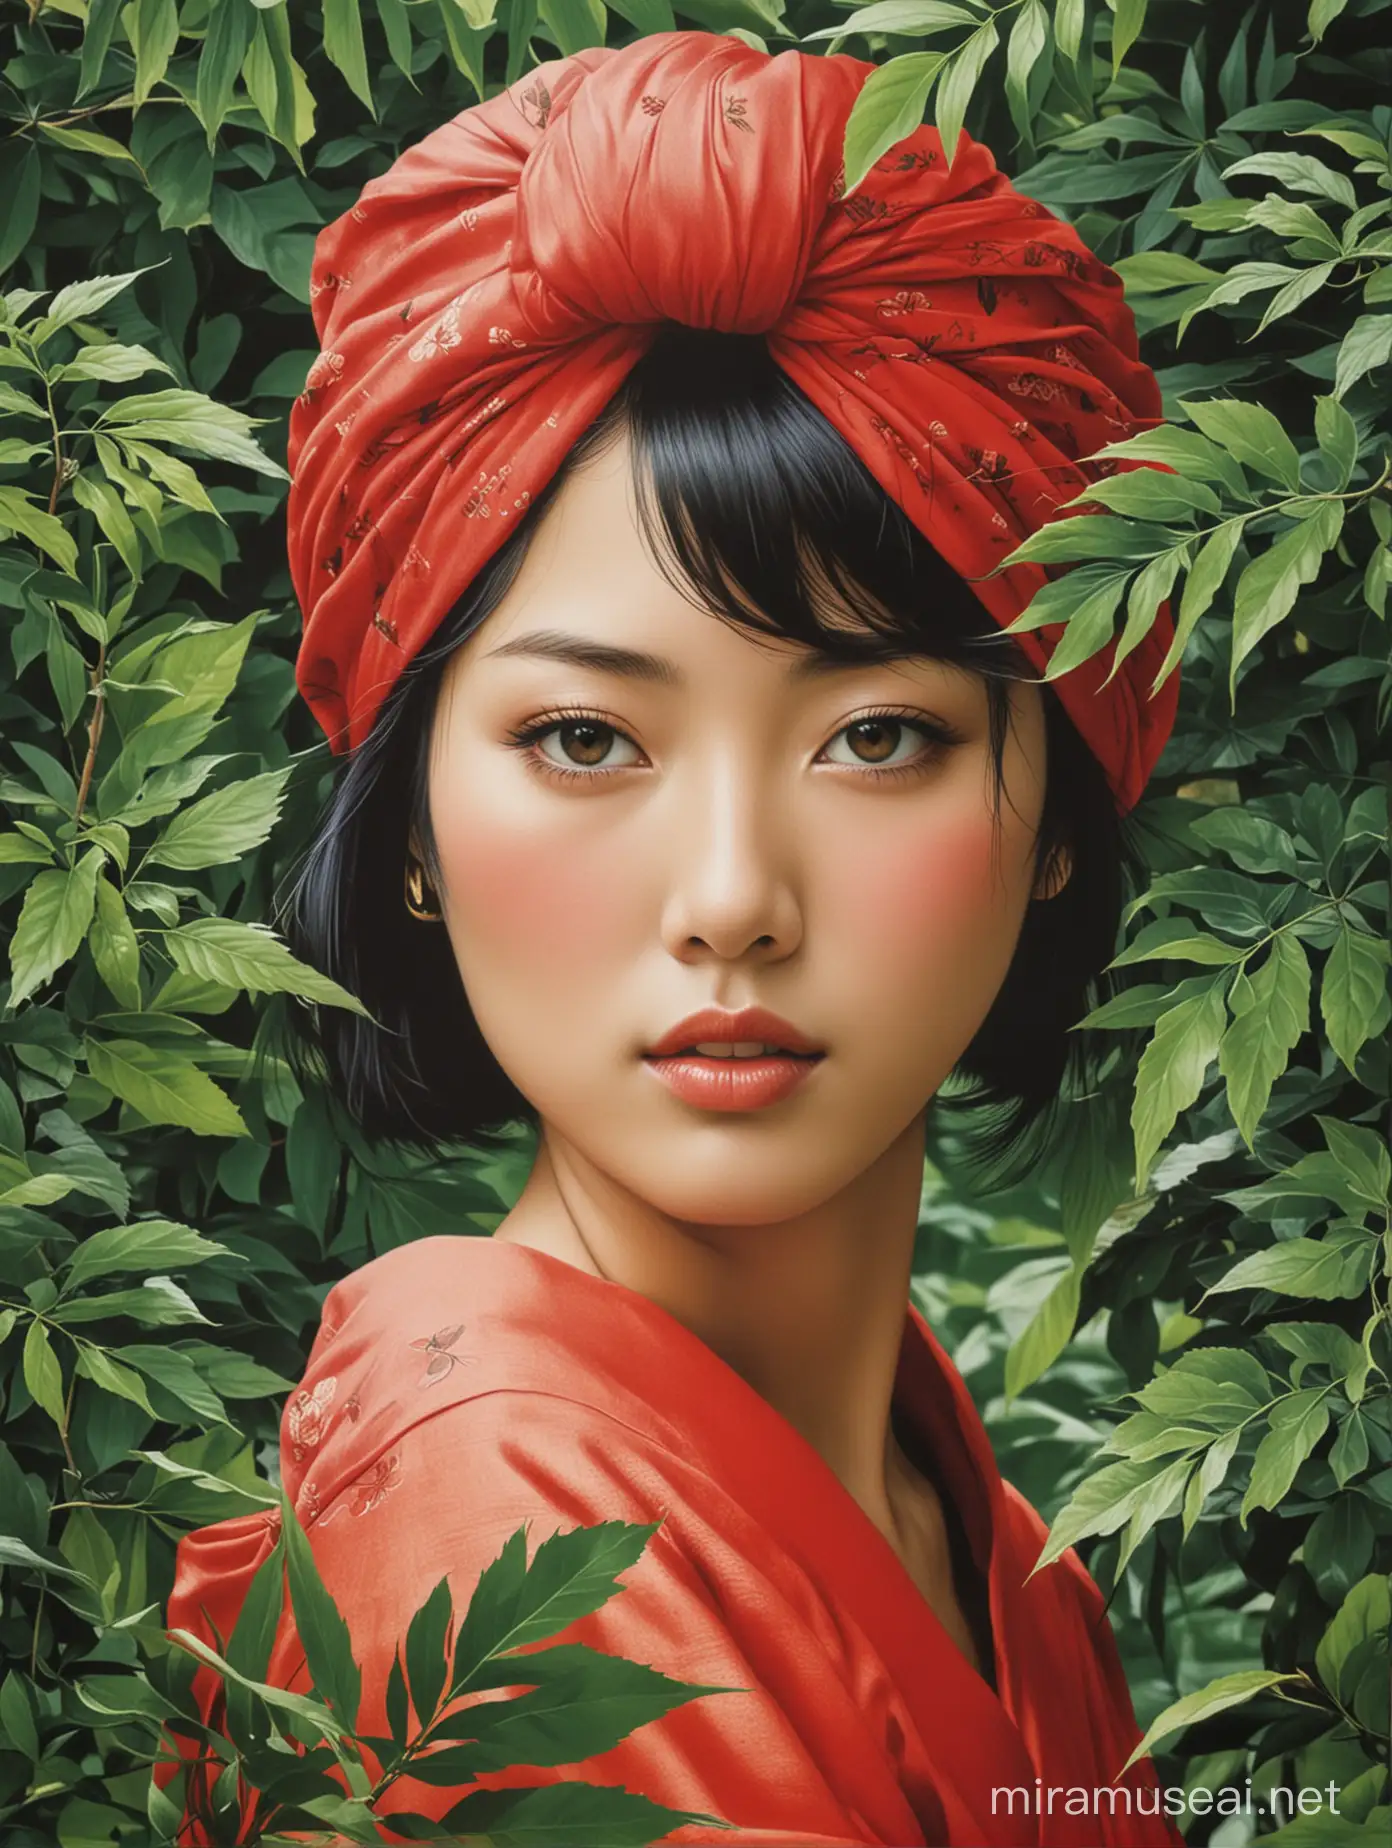 Japanese Poster Girl with Black Hair and Red Turban Covered by Green Leaves